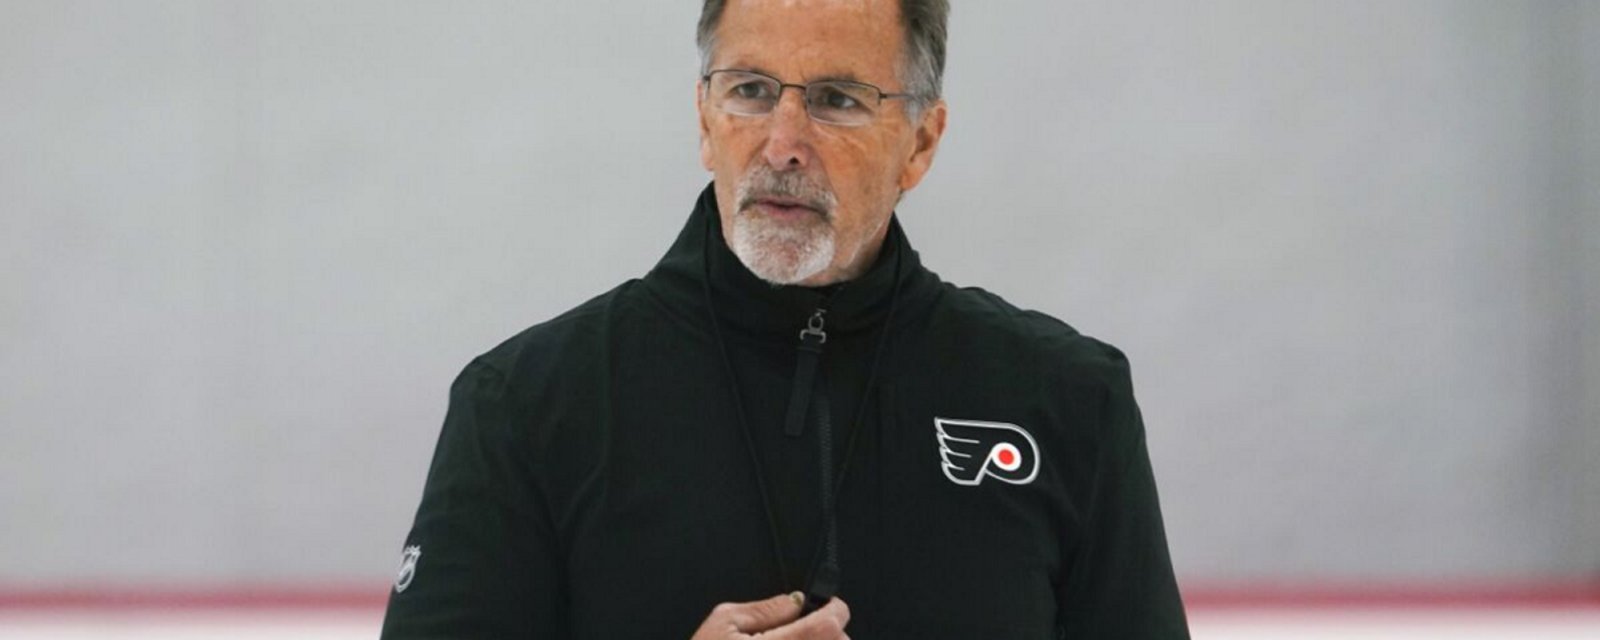 Tortorella says “no hesitation” for Flyers at the trade deadline.